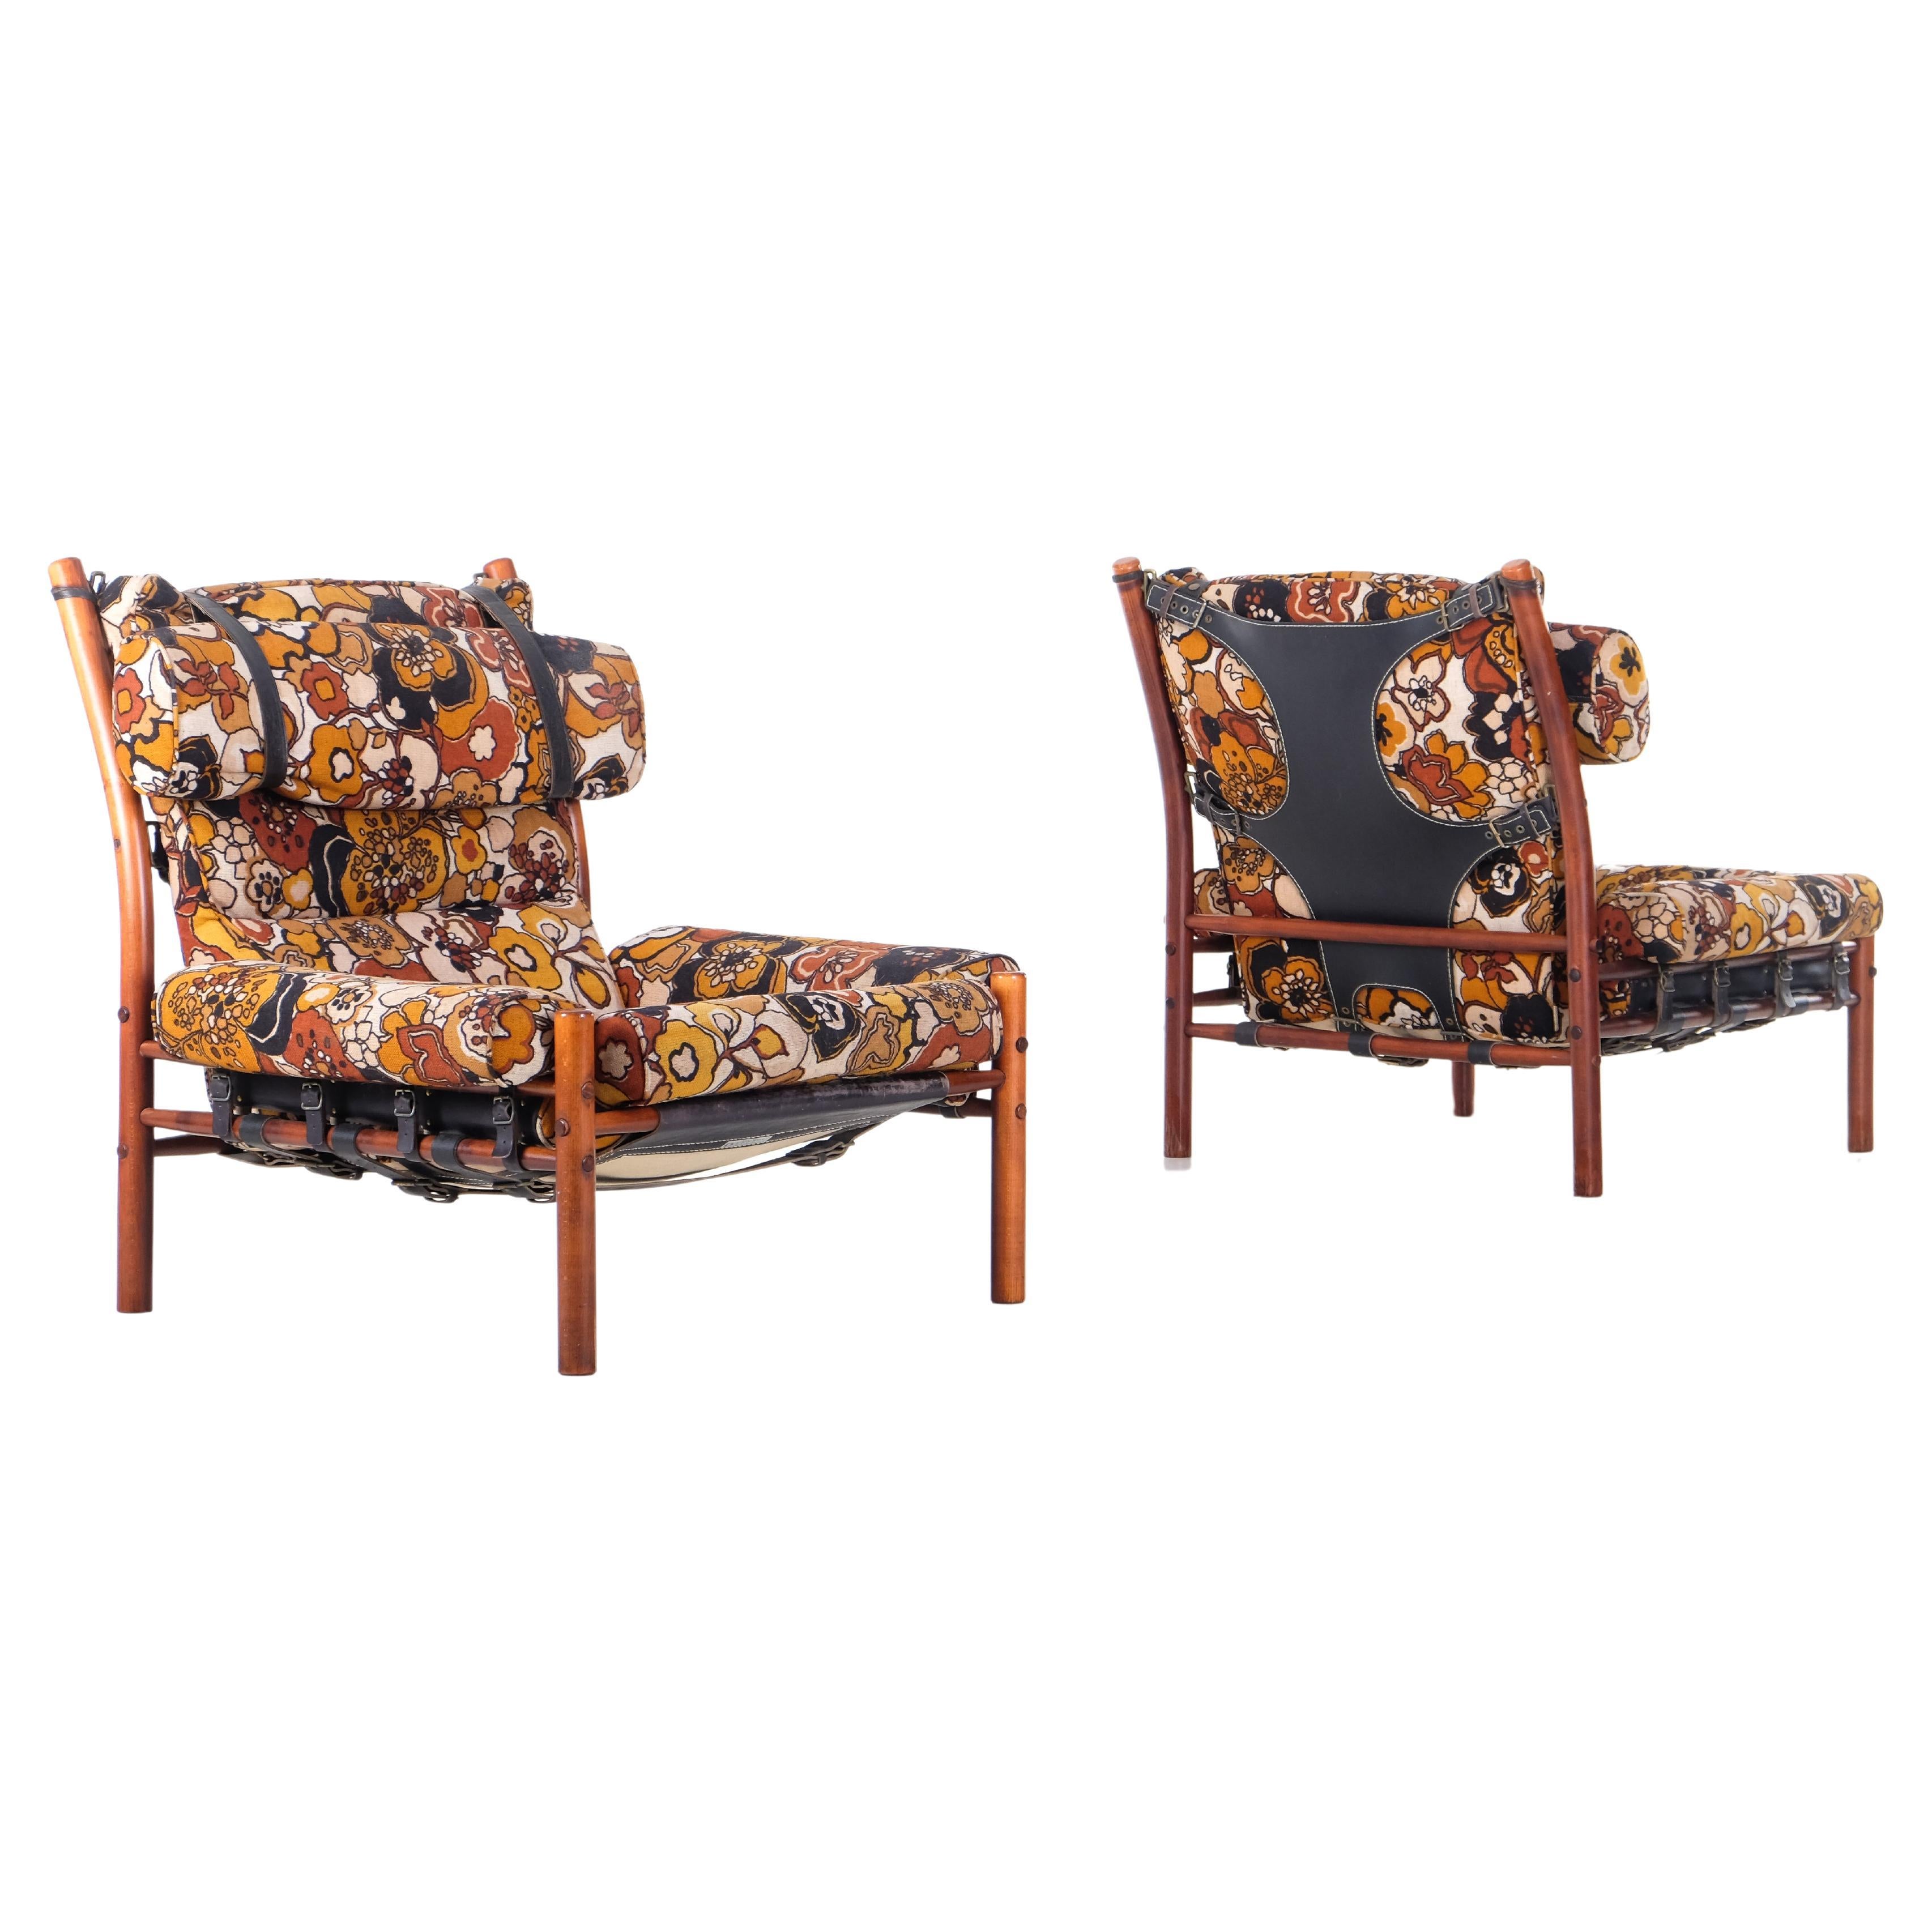 Pair of Arne Norell "Inca" Easy Chairs, 1970s